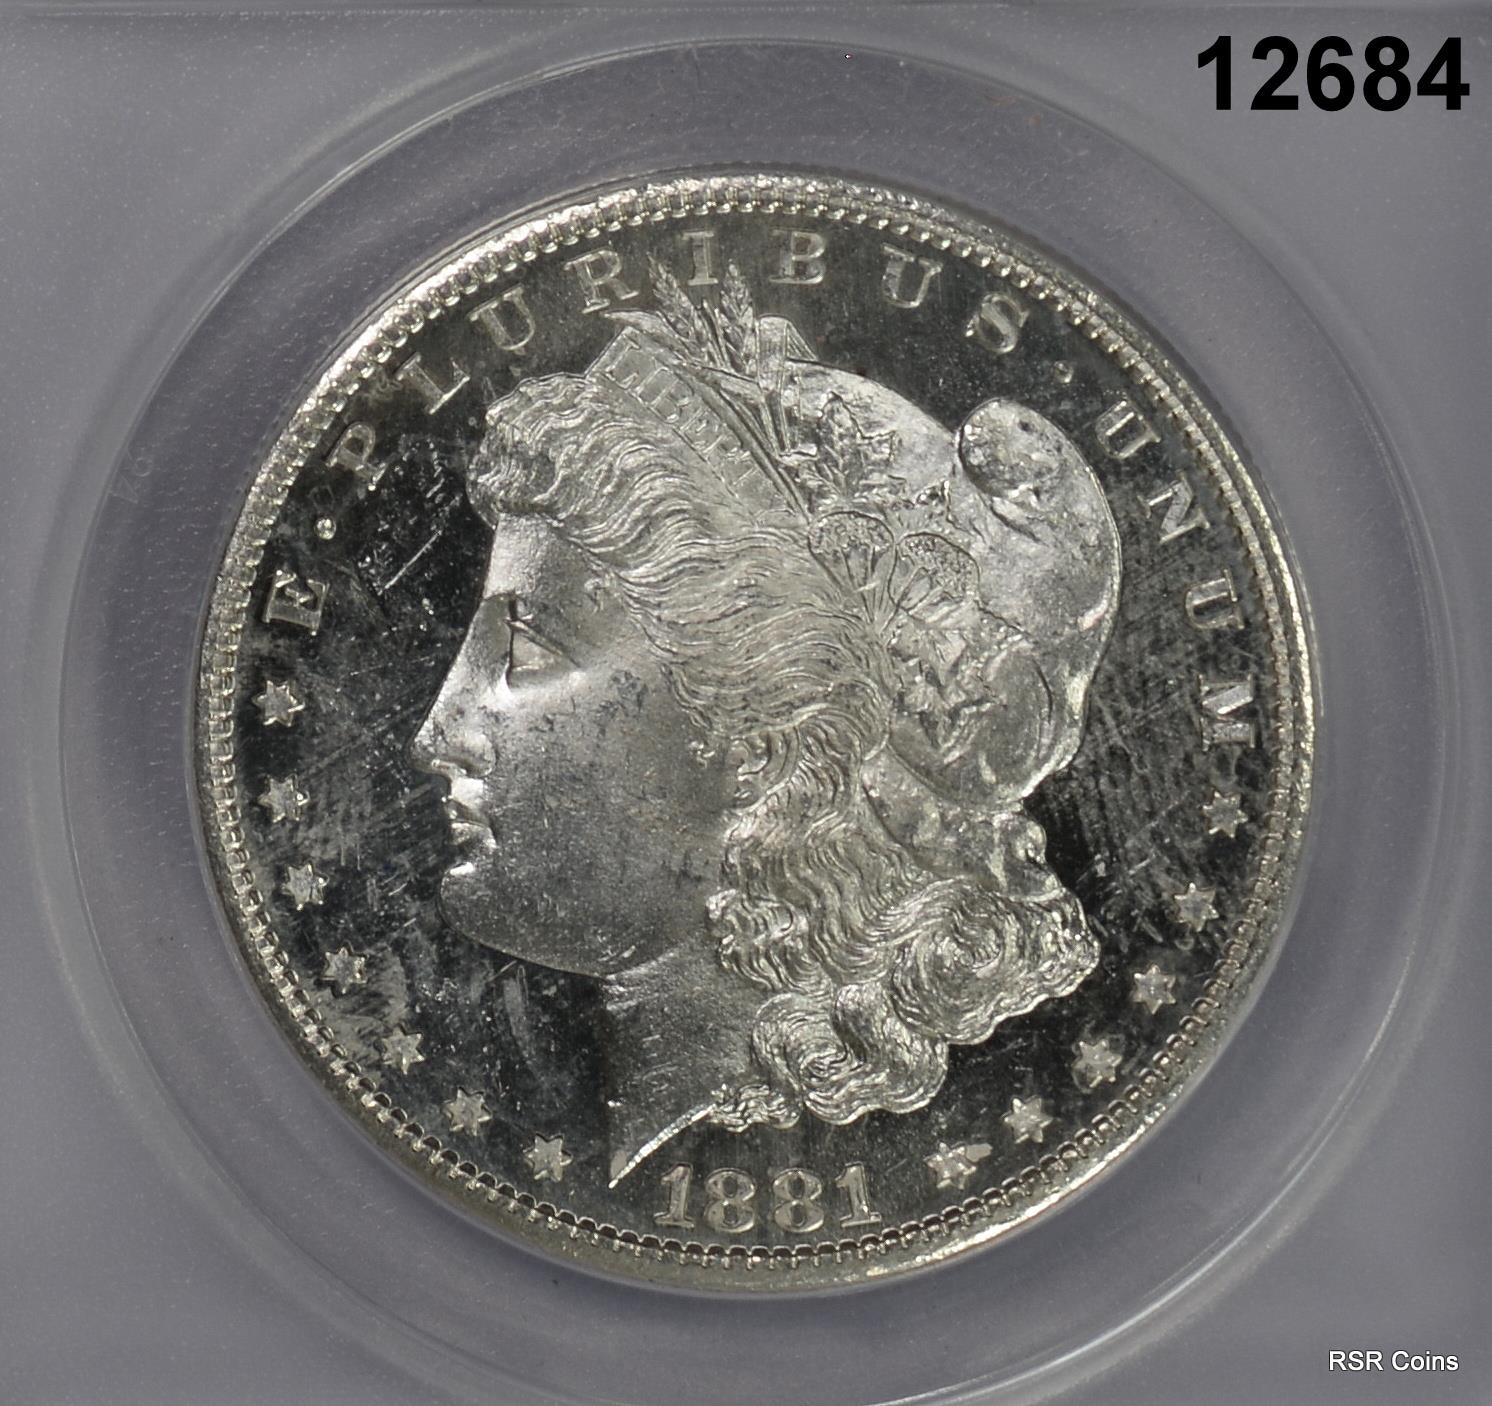 1881 S MORGAN SILVER DOLLAR ANACS CERTIFIED MS62 DMPL LOOKS BETTER! #12684